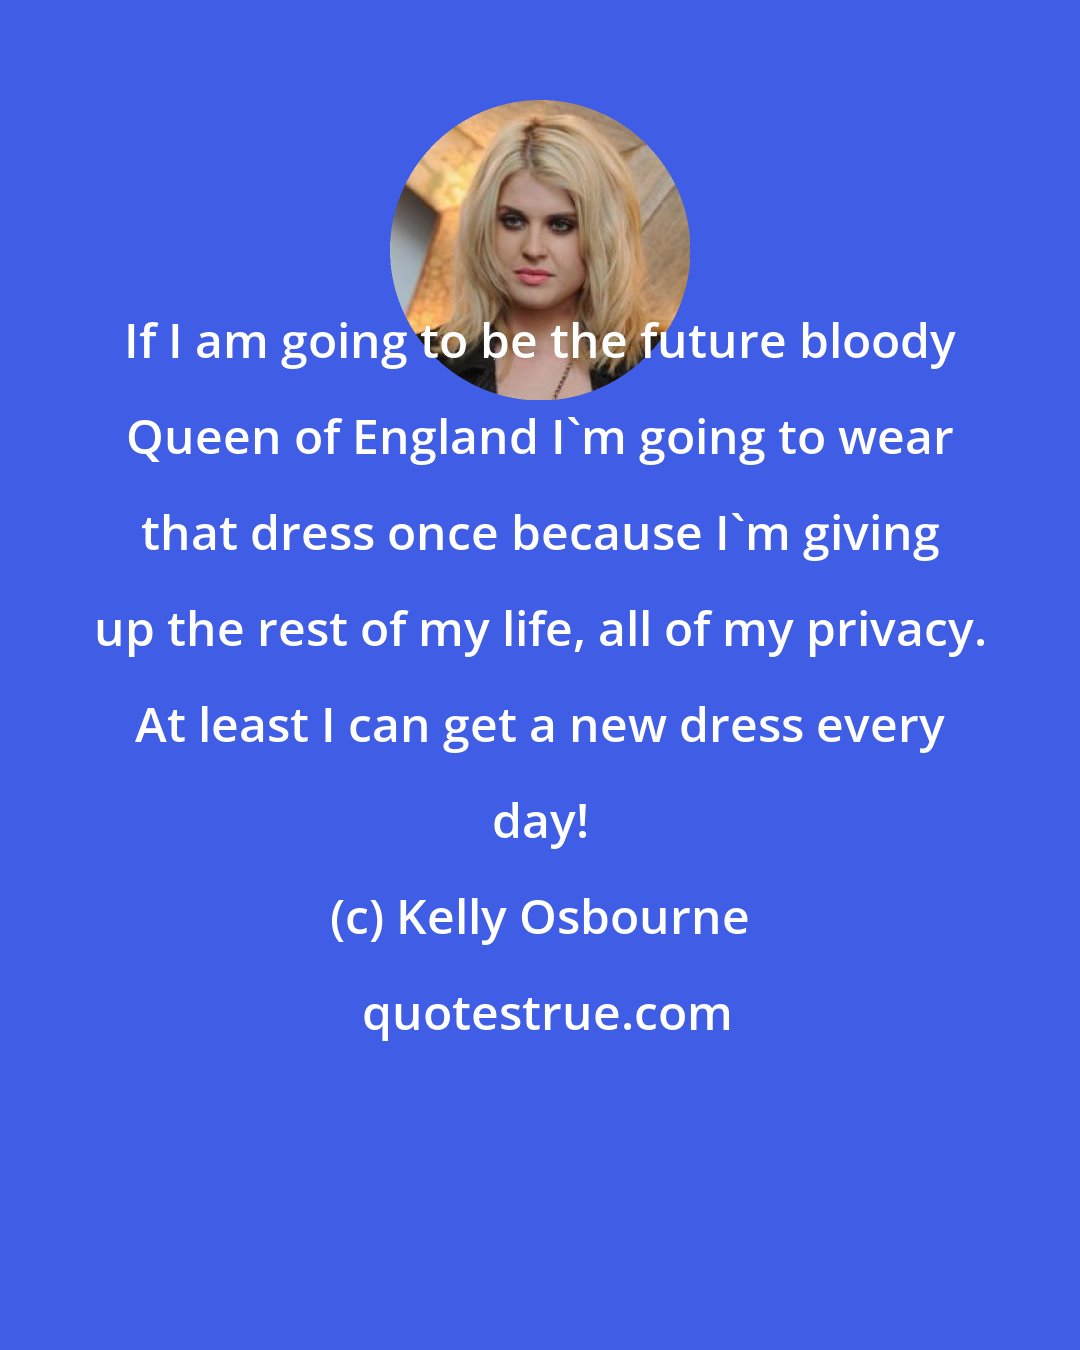 Kelly Osbourne: If I am going to be the future bloody Queen of England I'm going to wear that dress once because I'm giving up the rest of my life, all of my privacy. At least I can get a new dress every day!